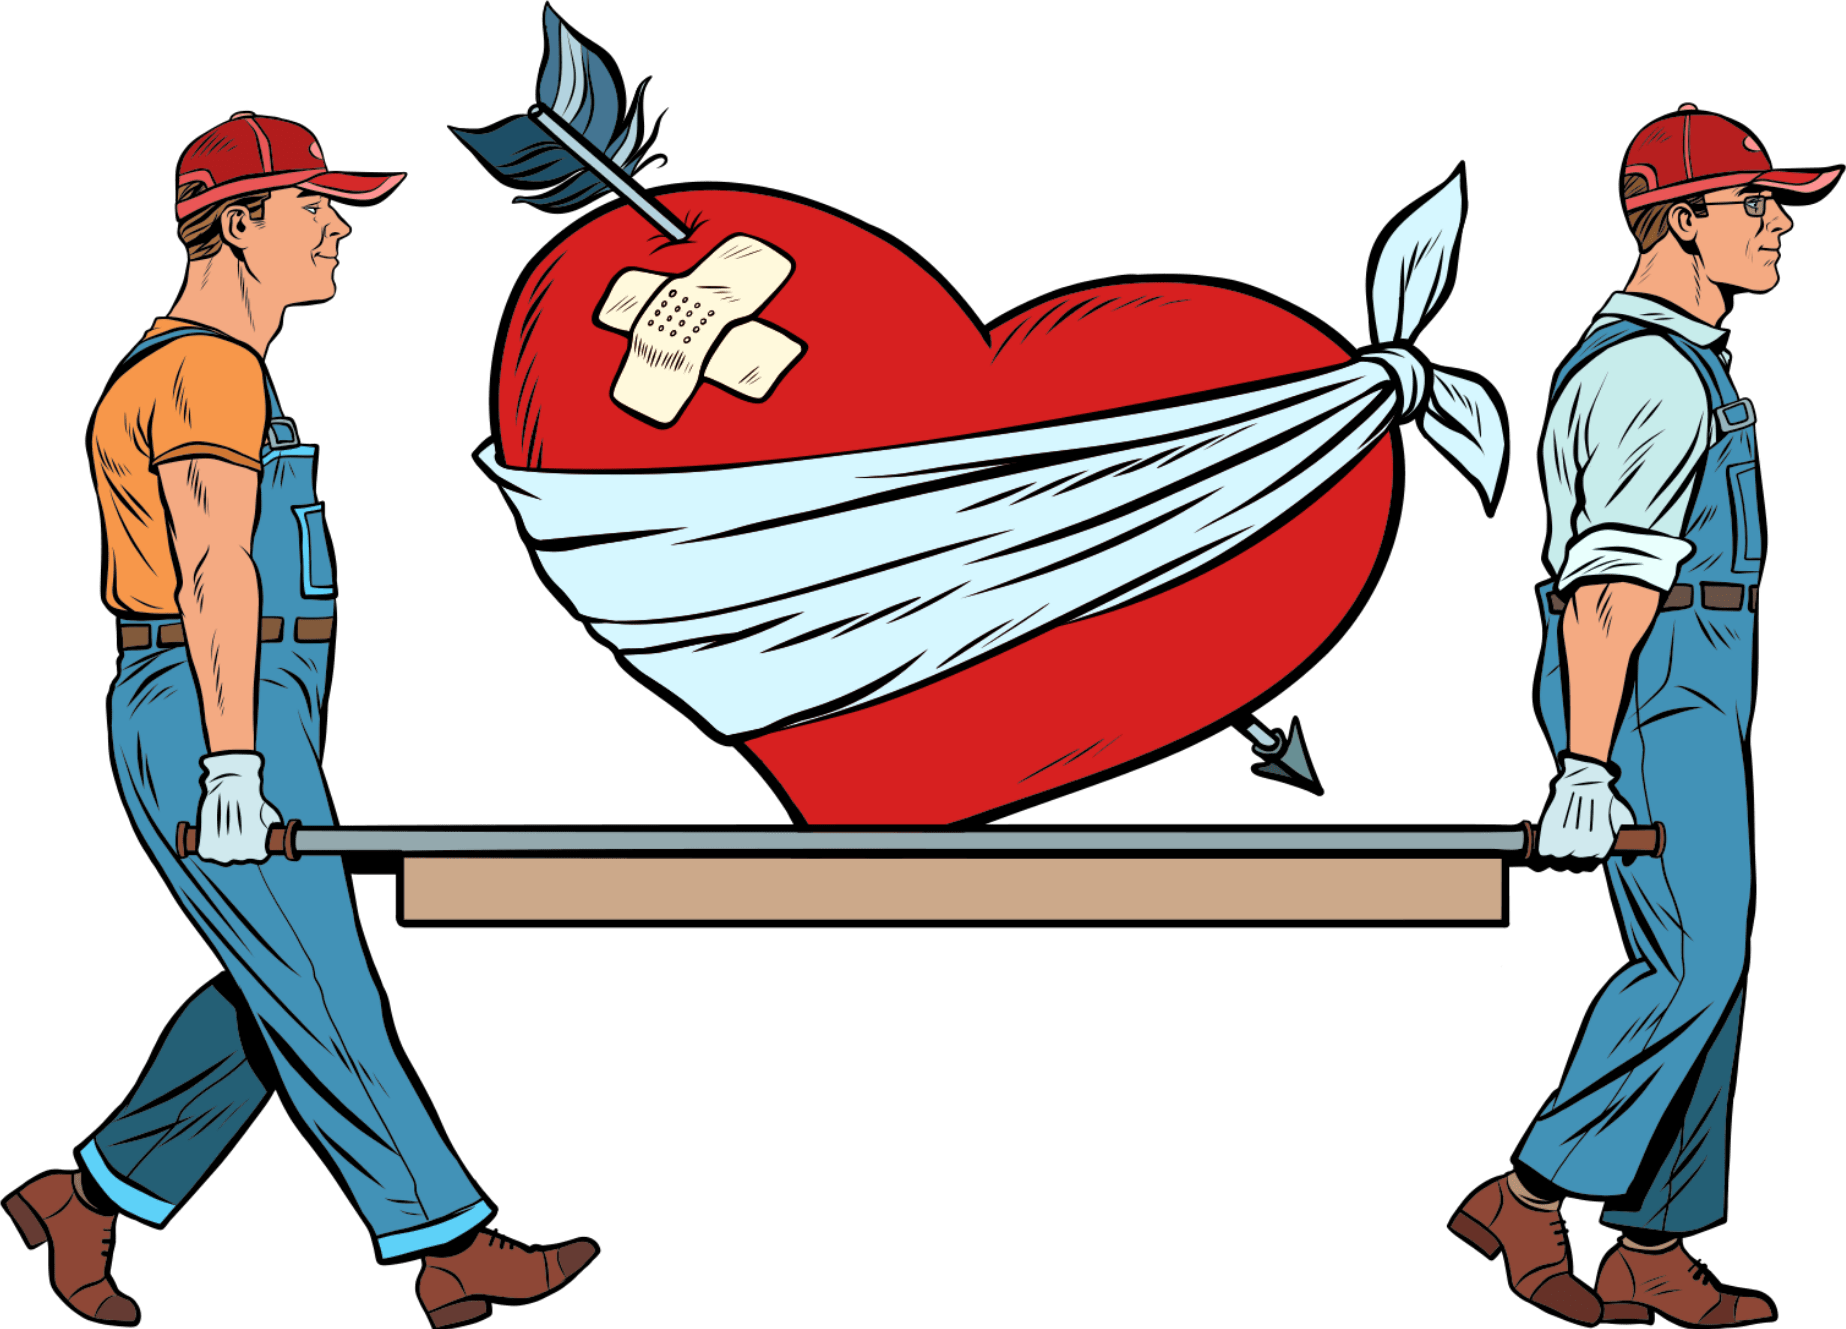 Two guys carrying a broken heart on a stretcher